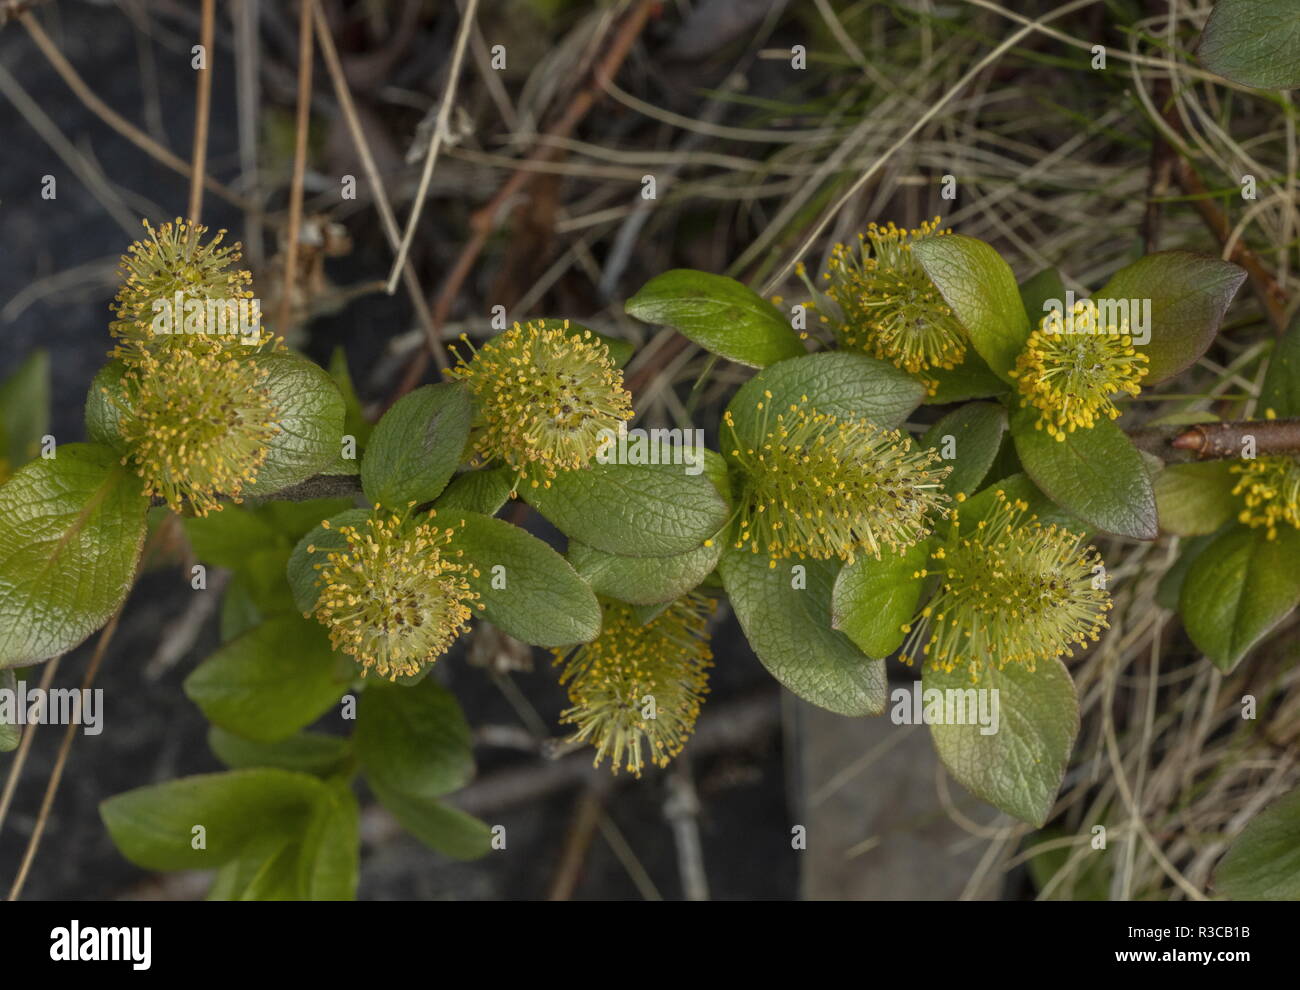 Mountain willow, Salix arbuscula in flower with male catkins. Arctic Sweden. Stock Photo